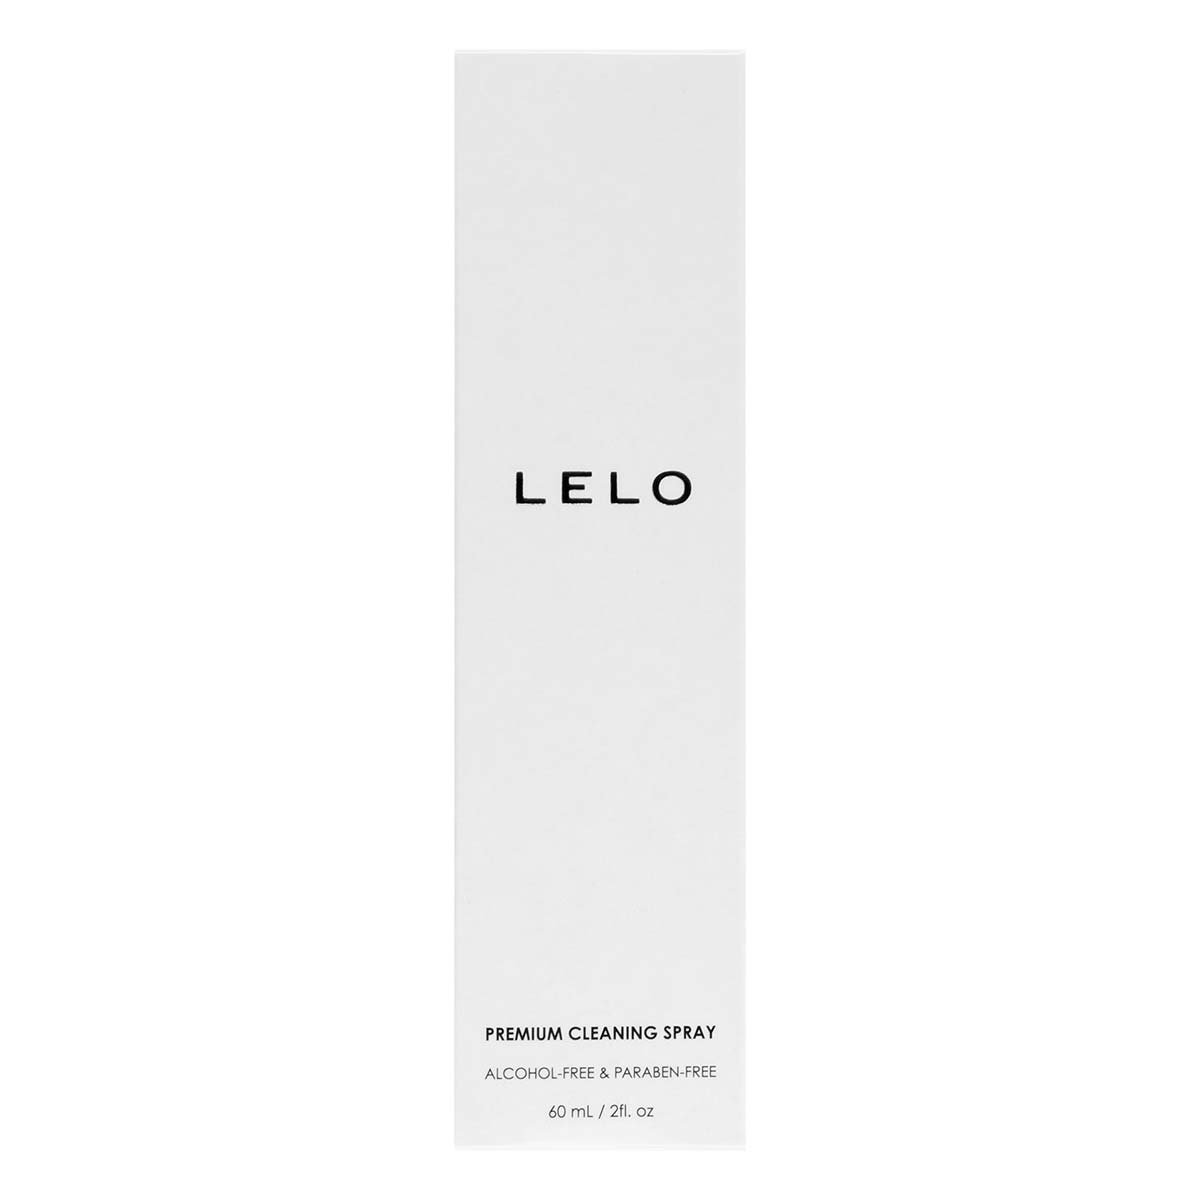 LELO (Toy) Cleaning Spray 60ml-p_2